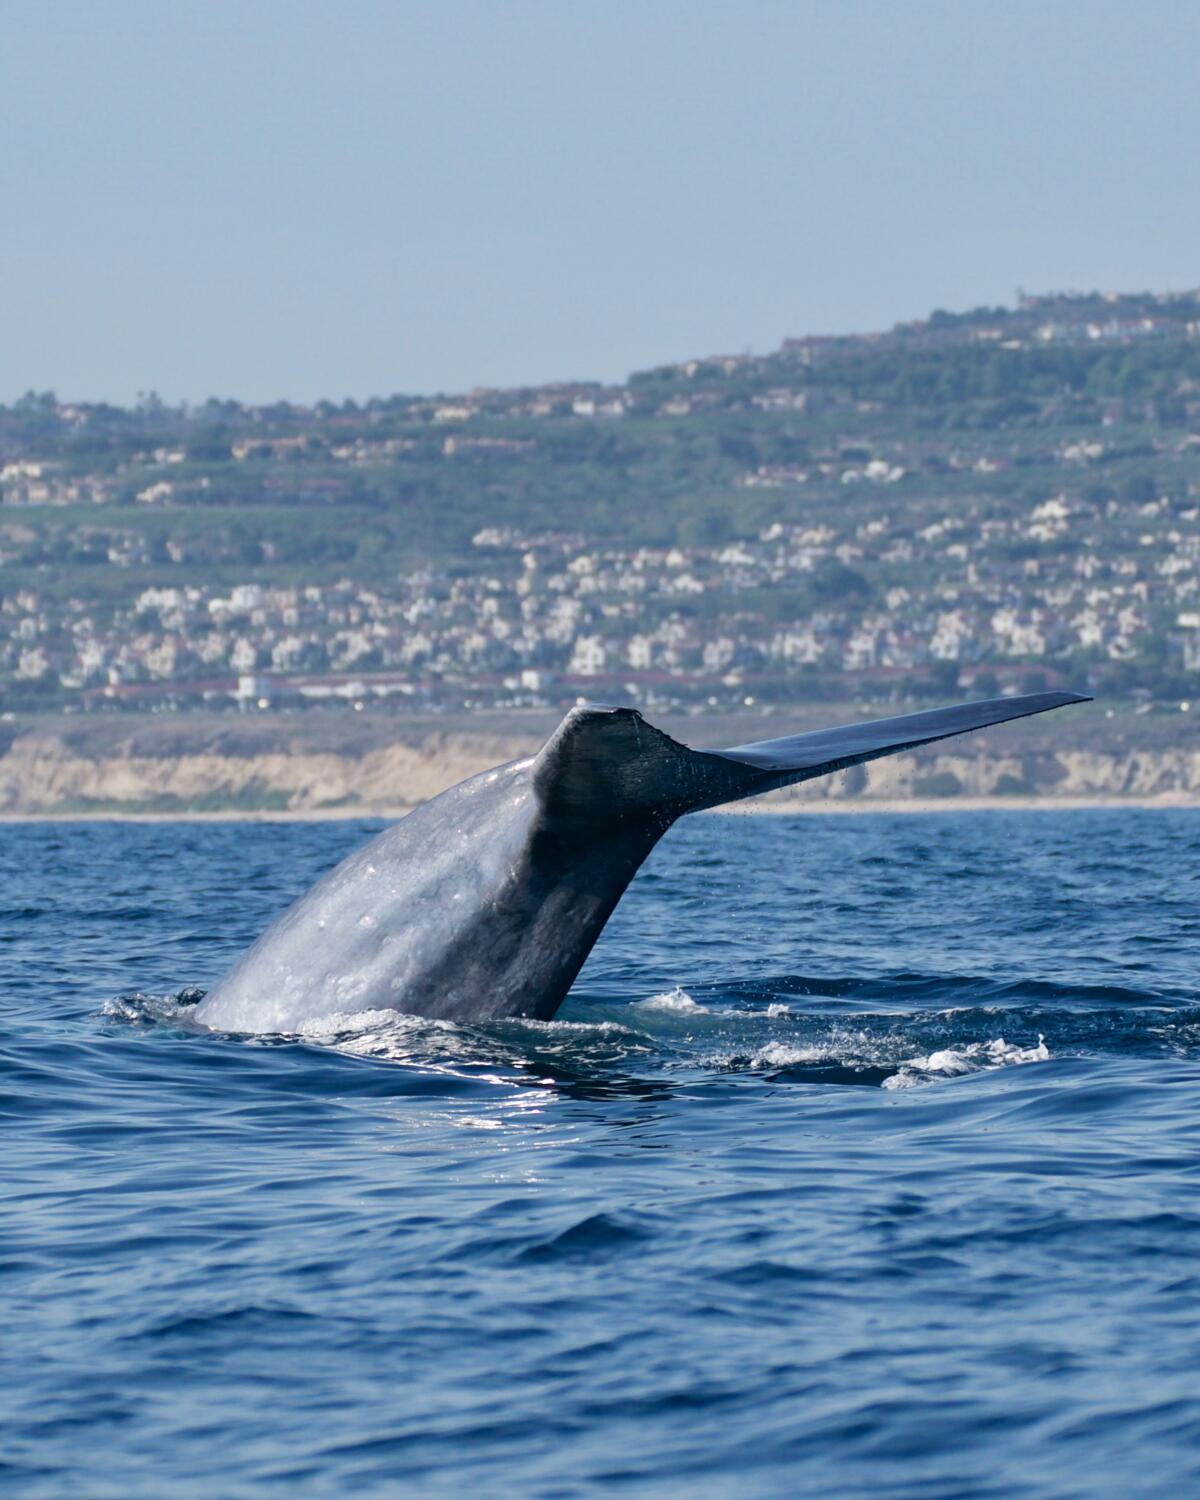 The tail of a blue whale sticking out of the ocean.